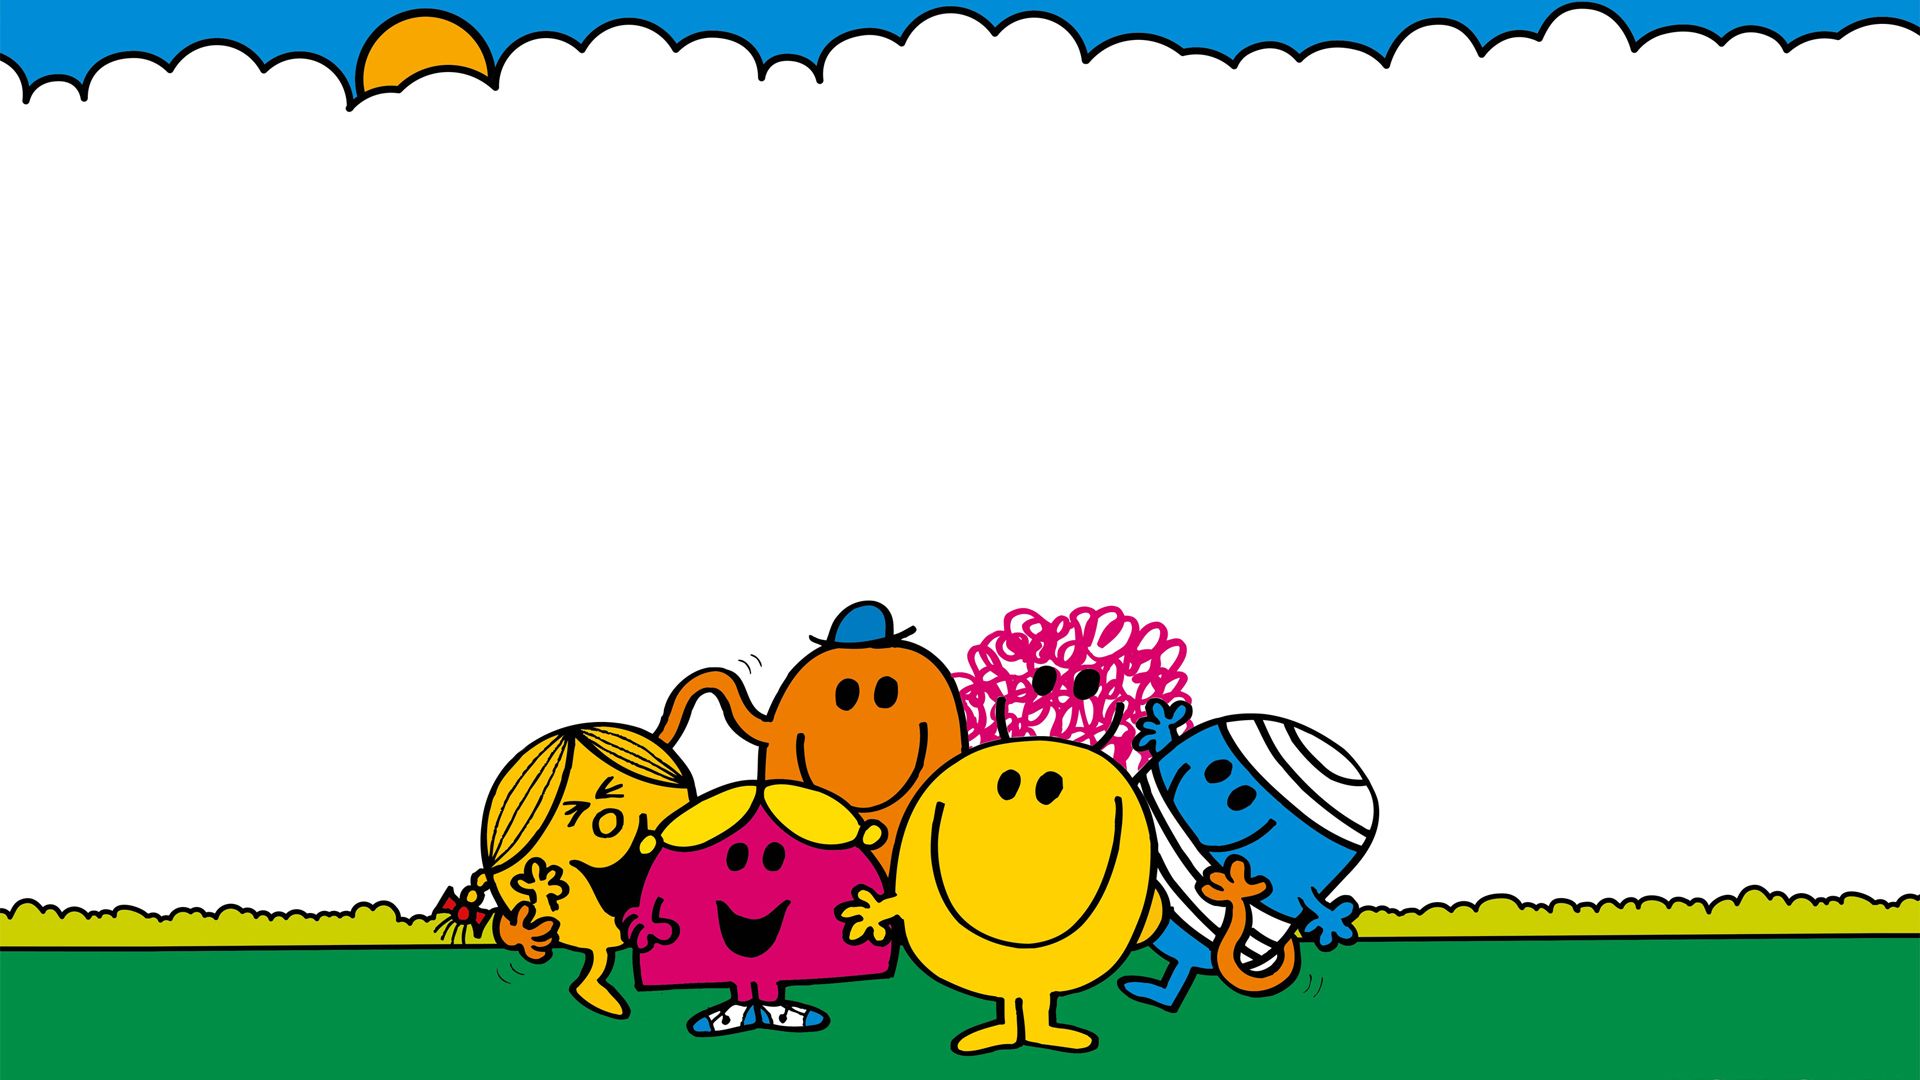 Mr. Men and Little Miss background